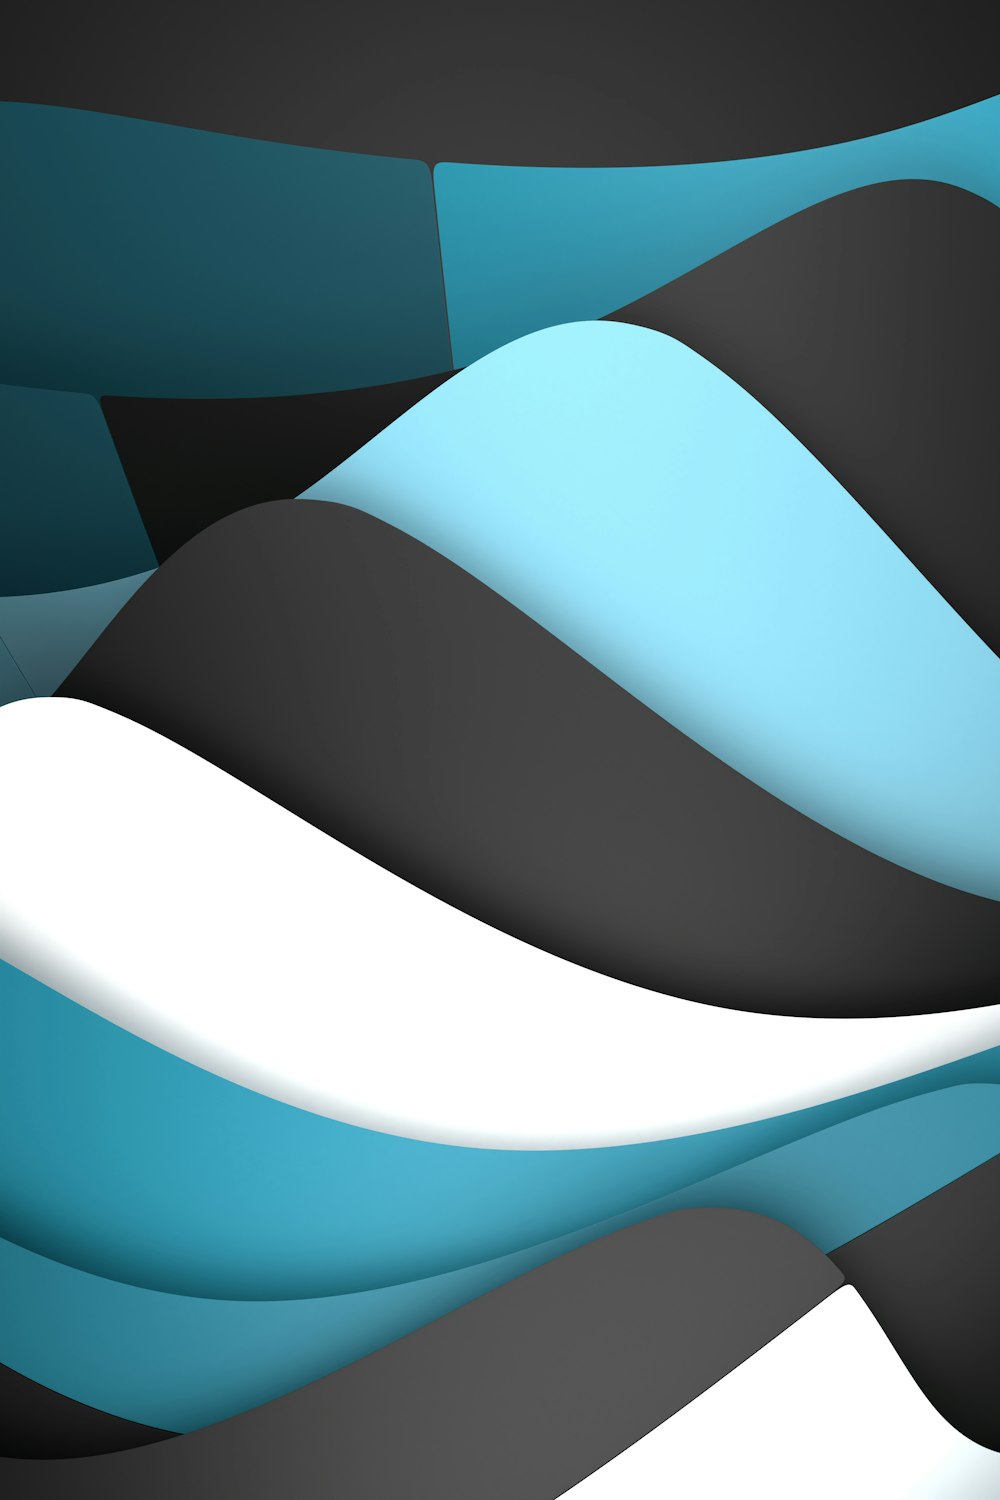 a black and blue abstract background with white and black curves